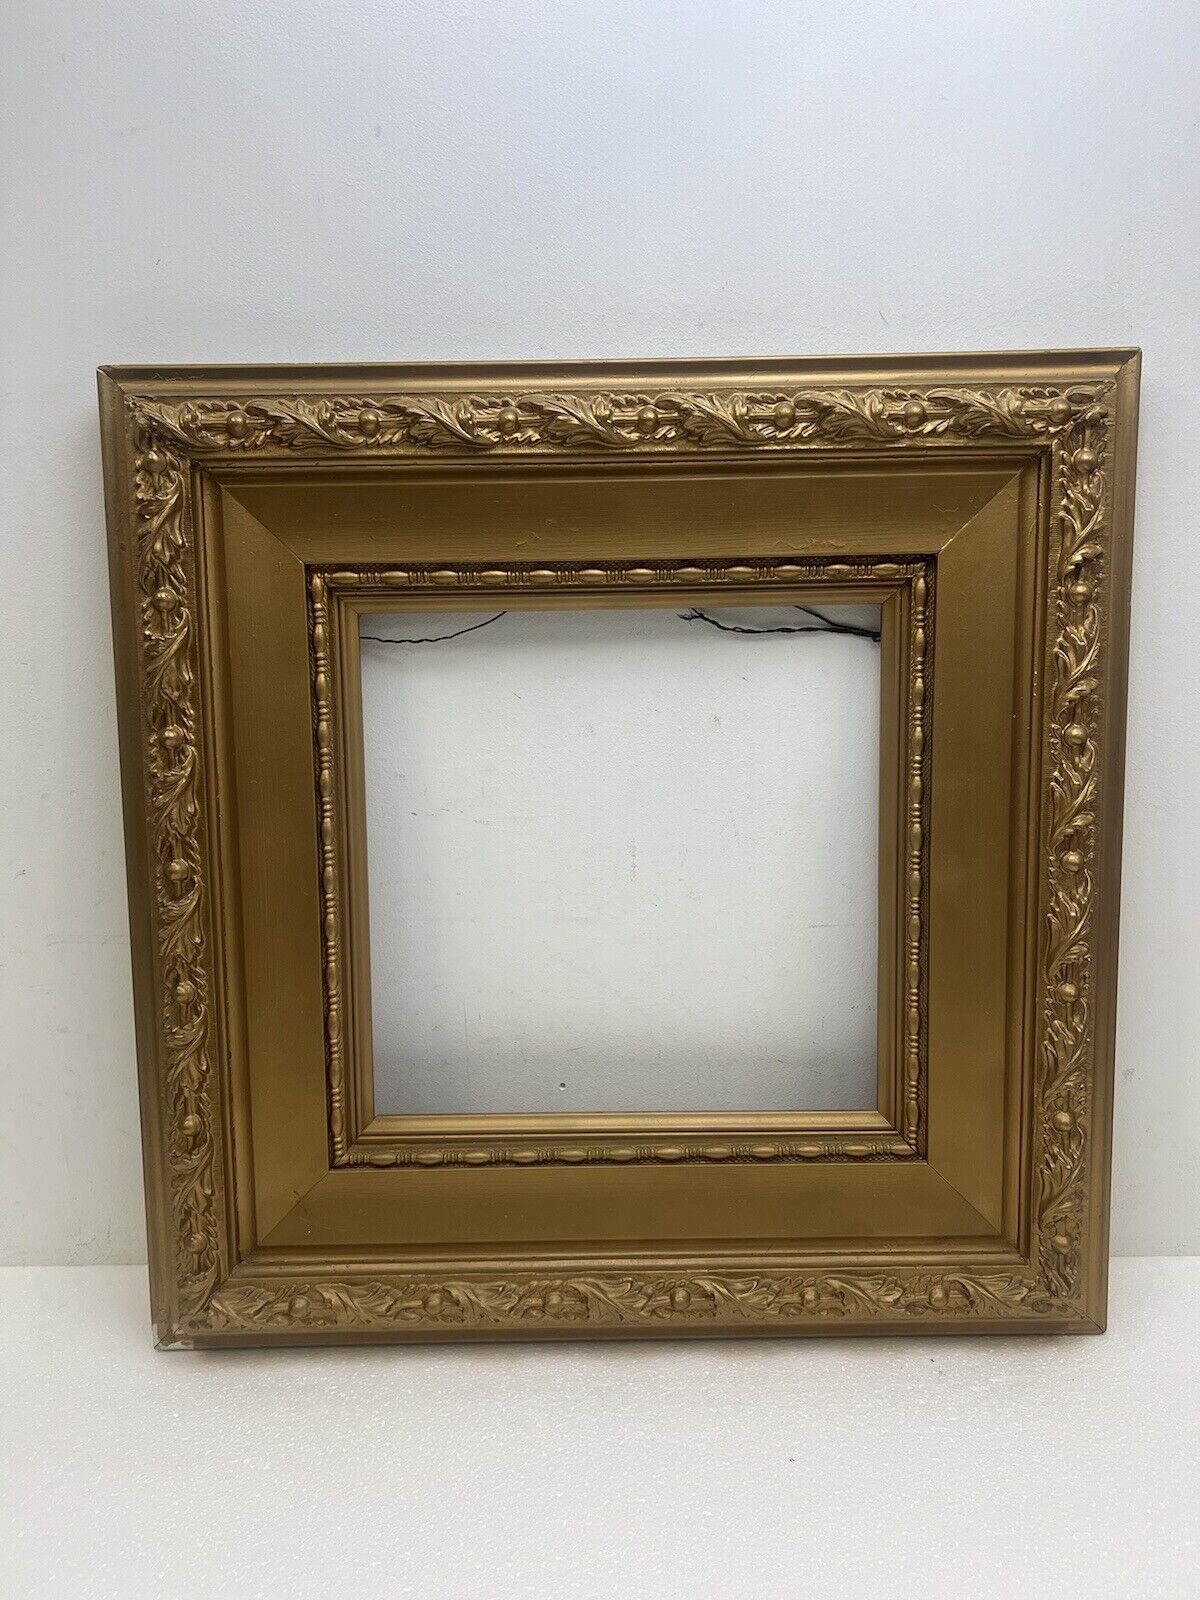 Antique Picture Frame gold wood vintage ornate gesso FITS 14 x 14 LARGE layered